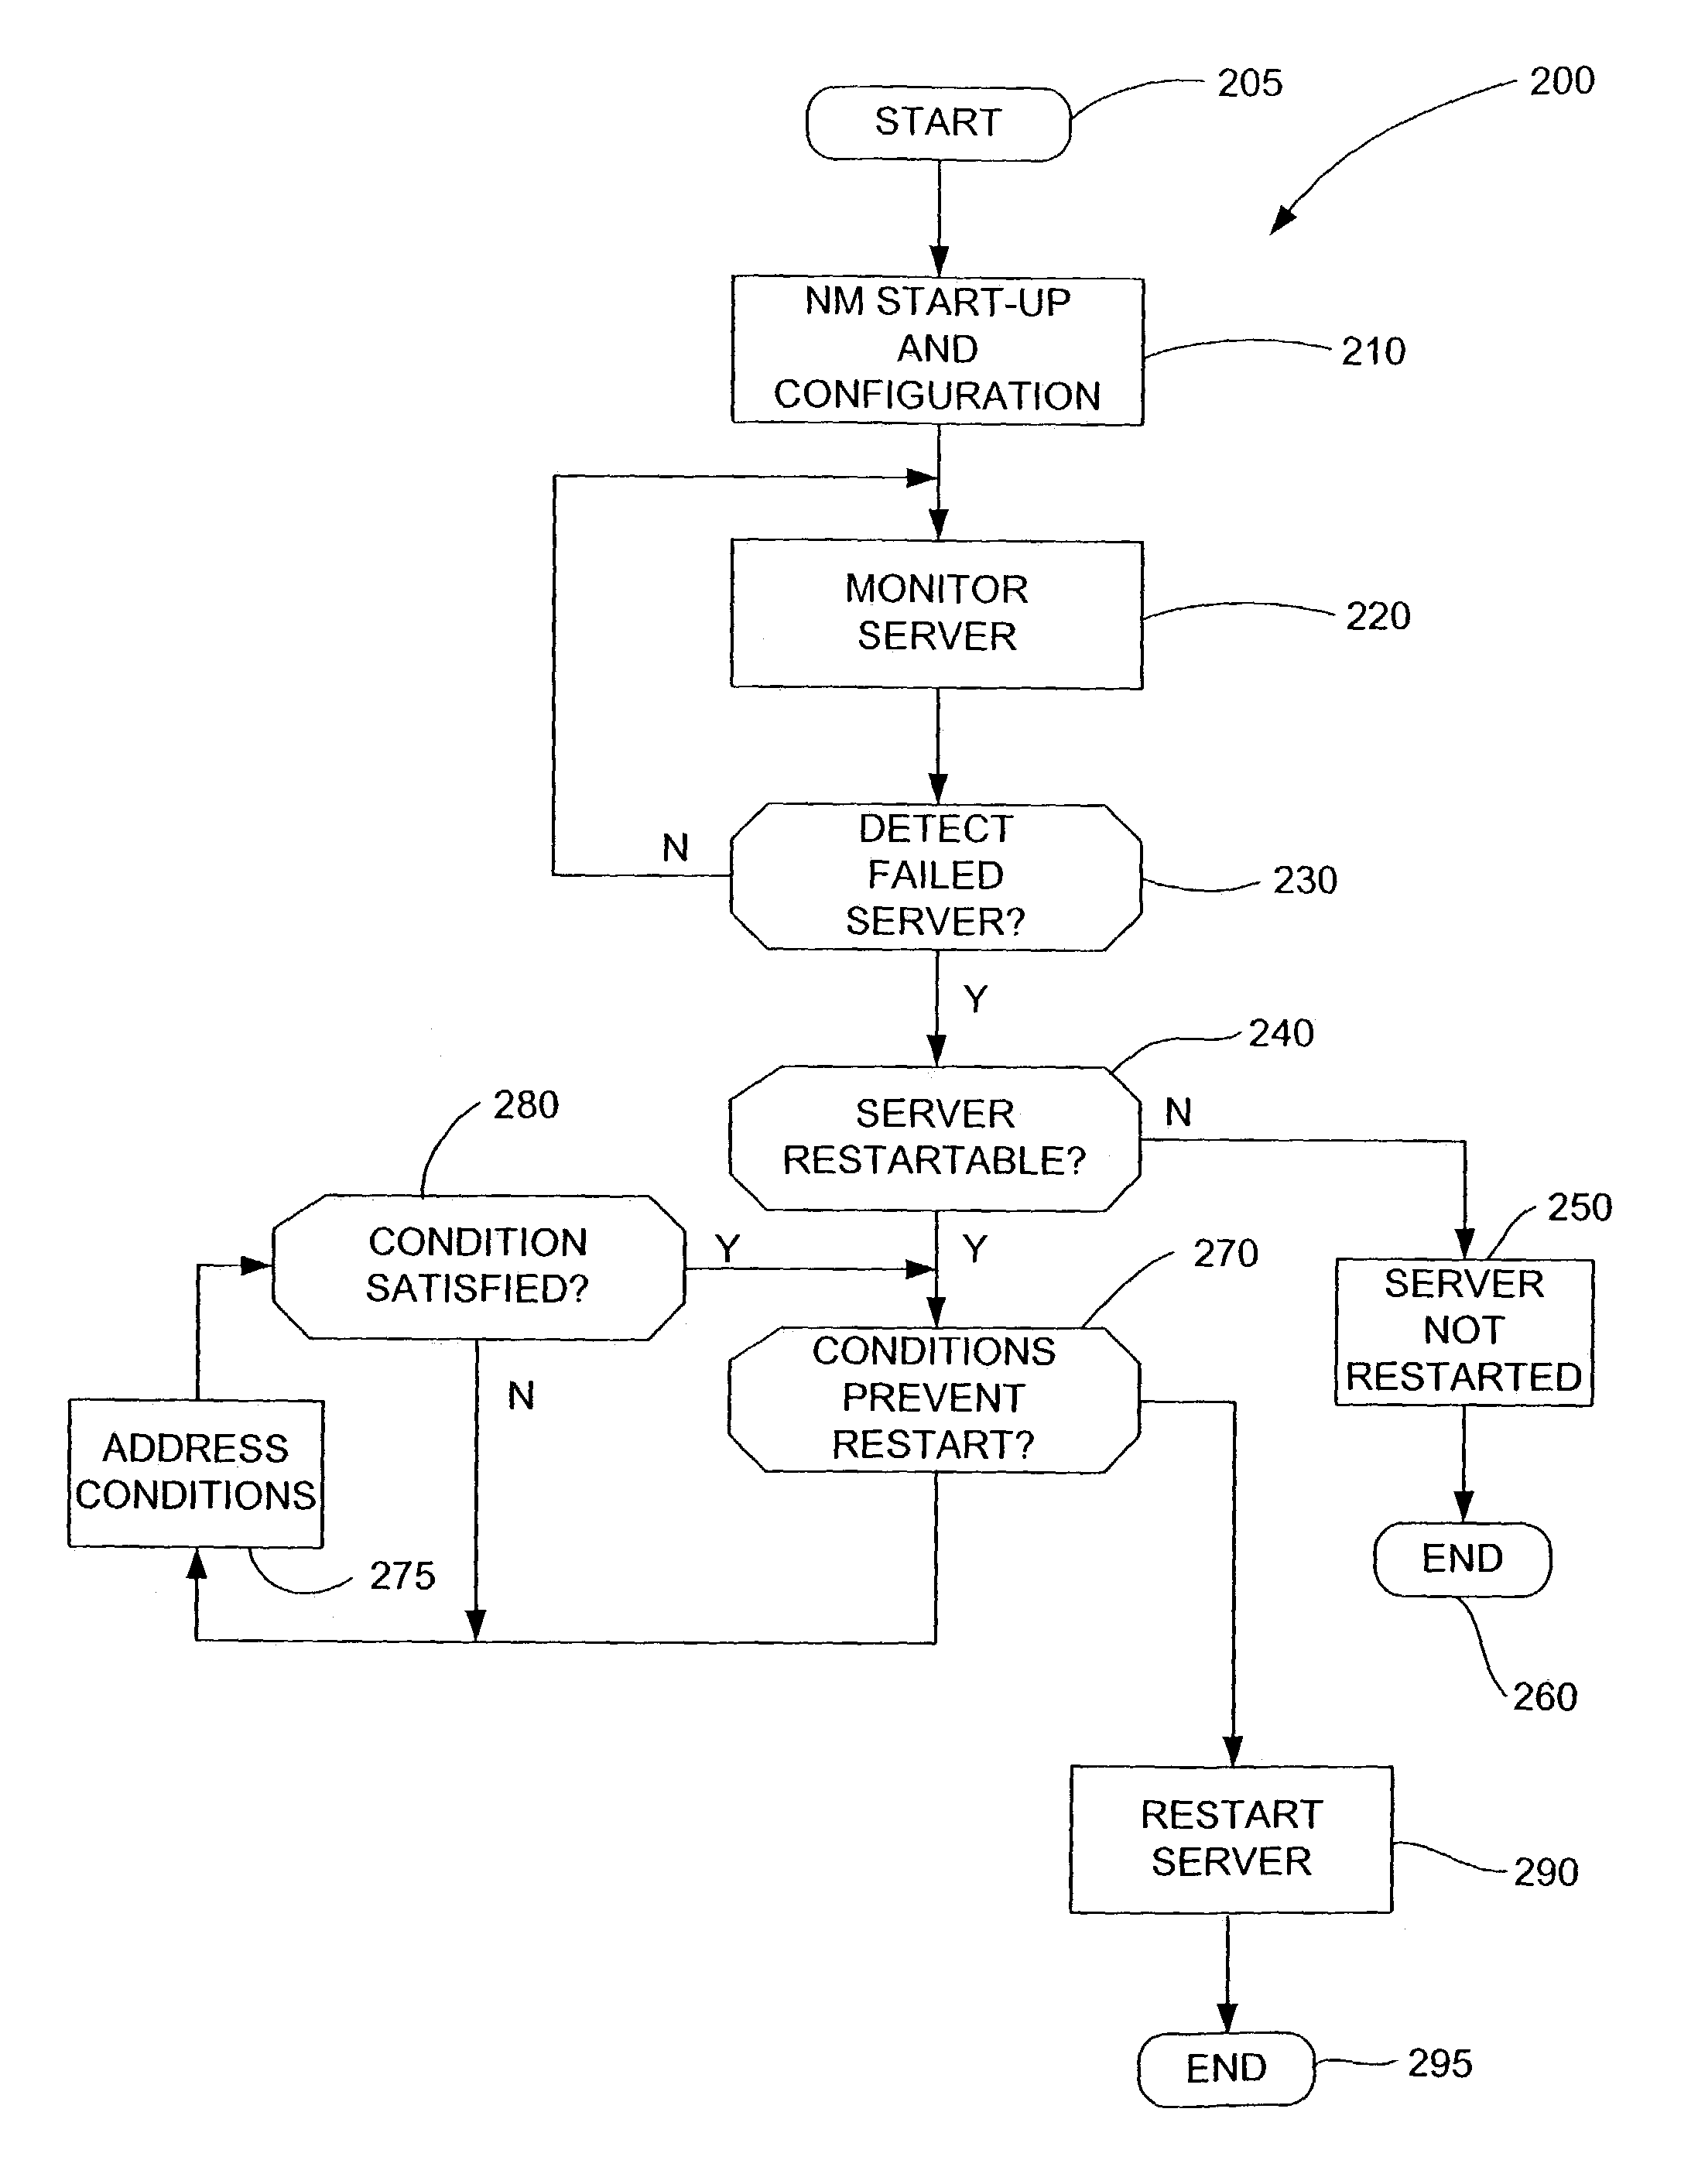 Method for automatic monitoring of managed server health